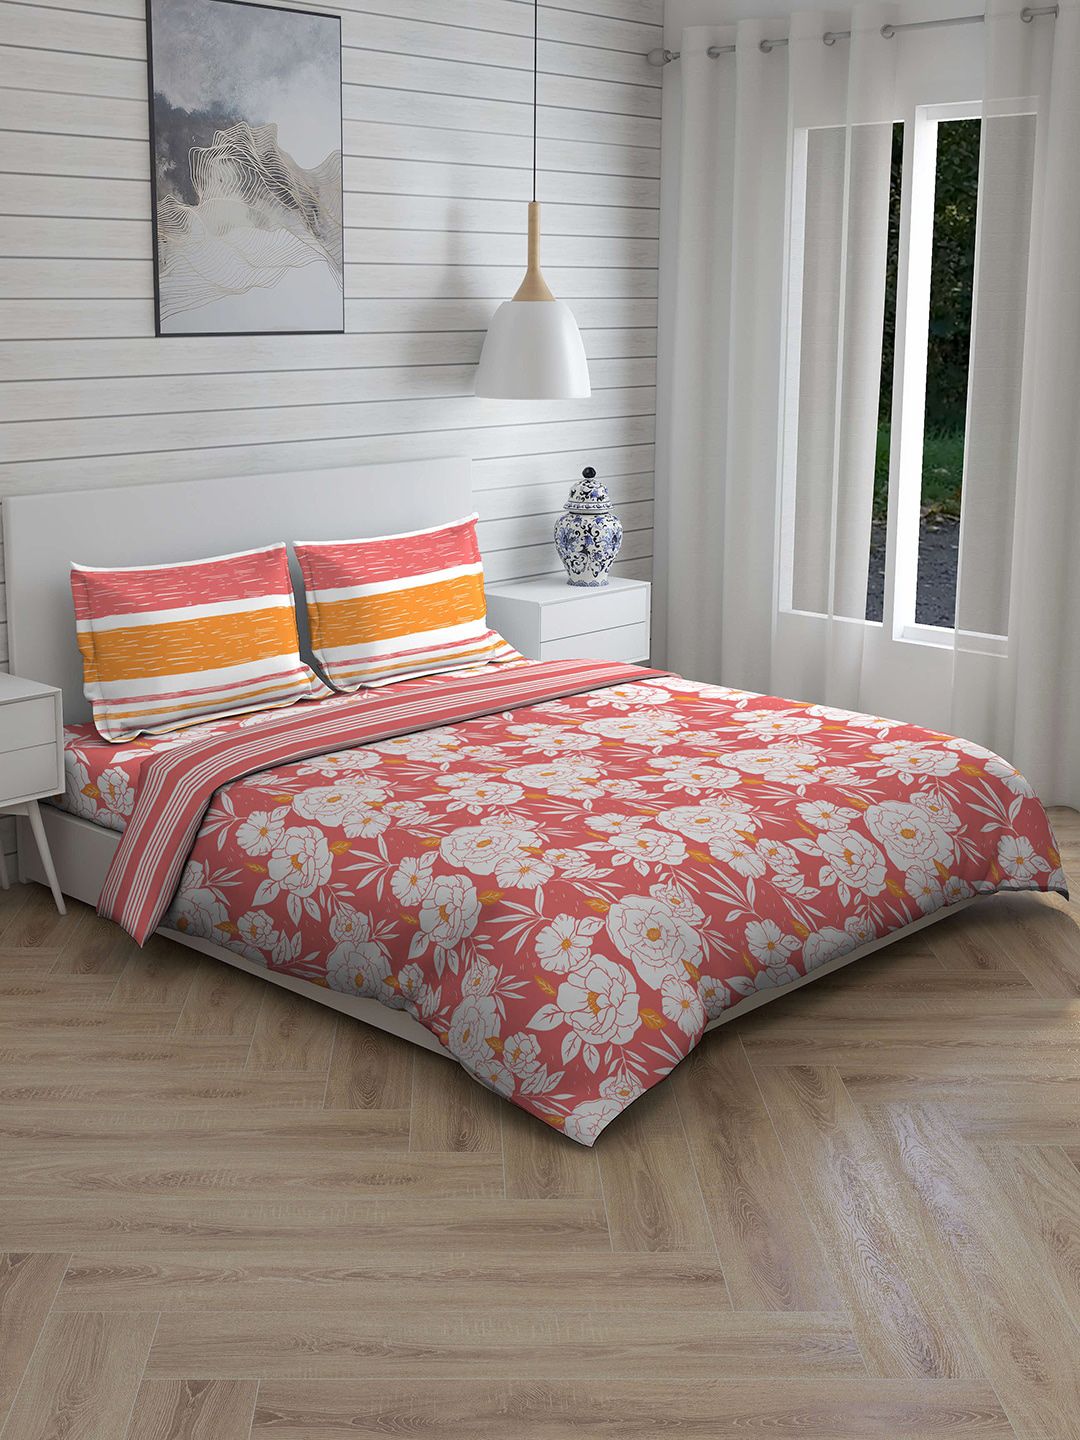 Boutique Living India Coral-Coloured & White Floral Printed 148 TC 100% Cotton Double King Bedding Set Price in India